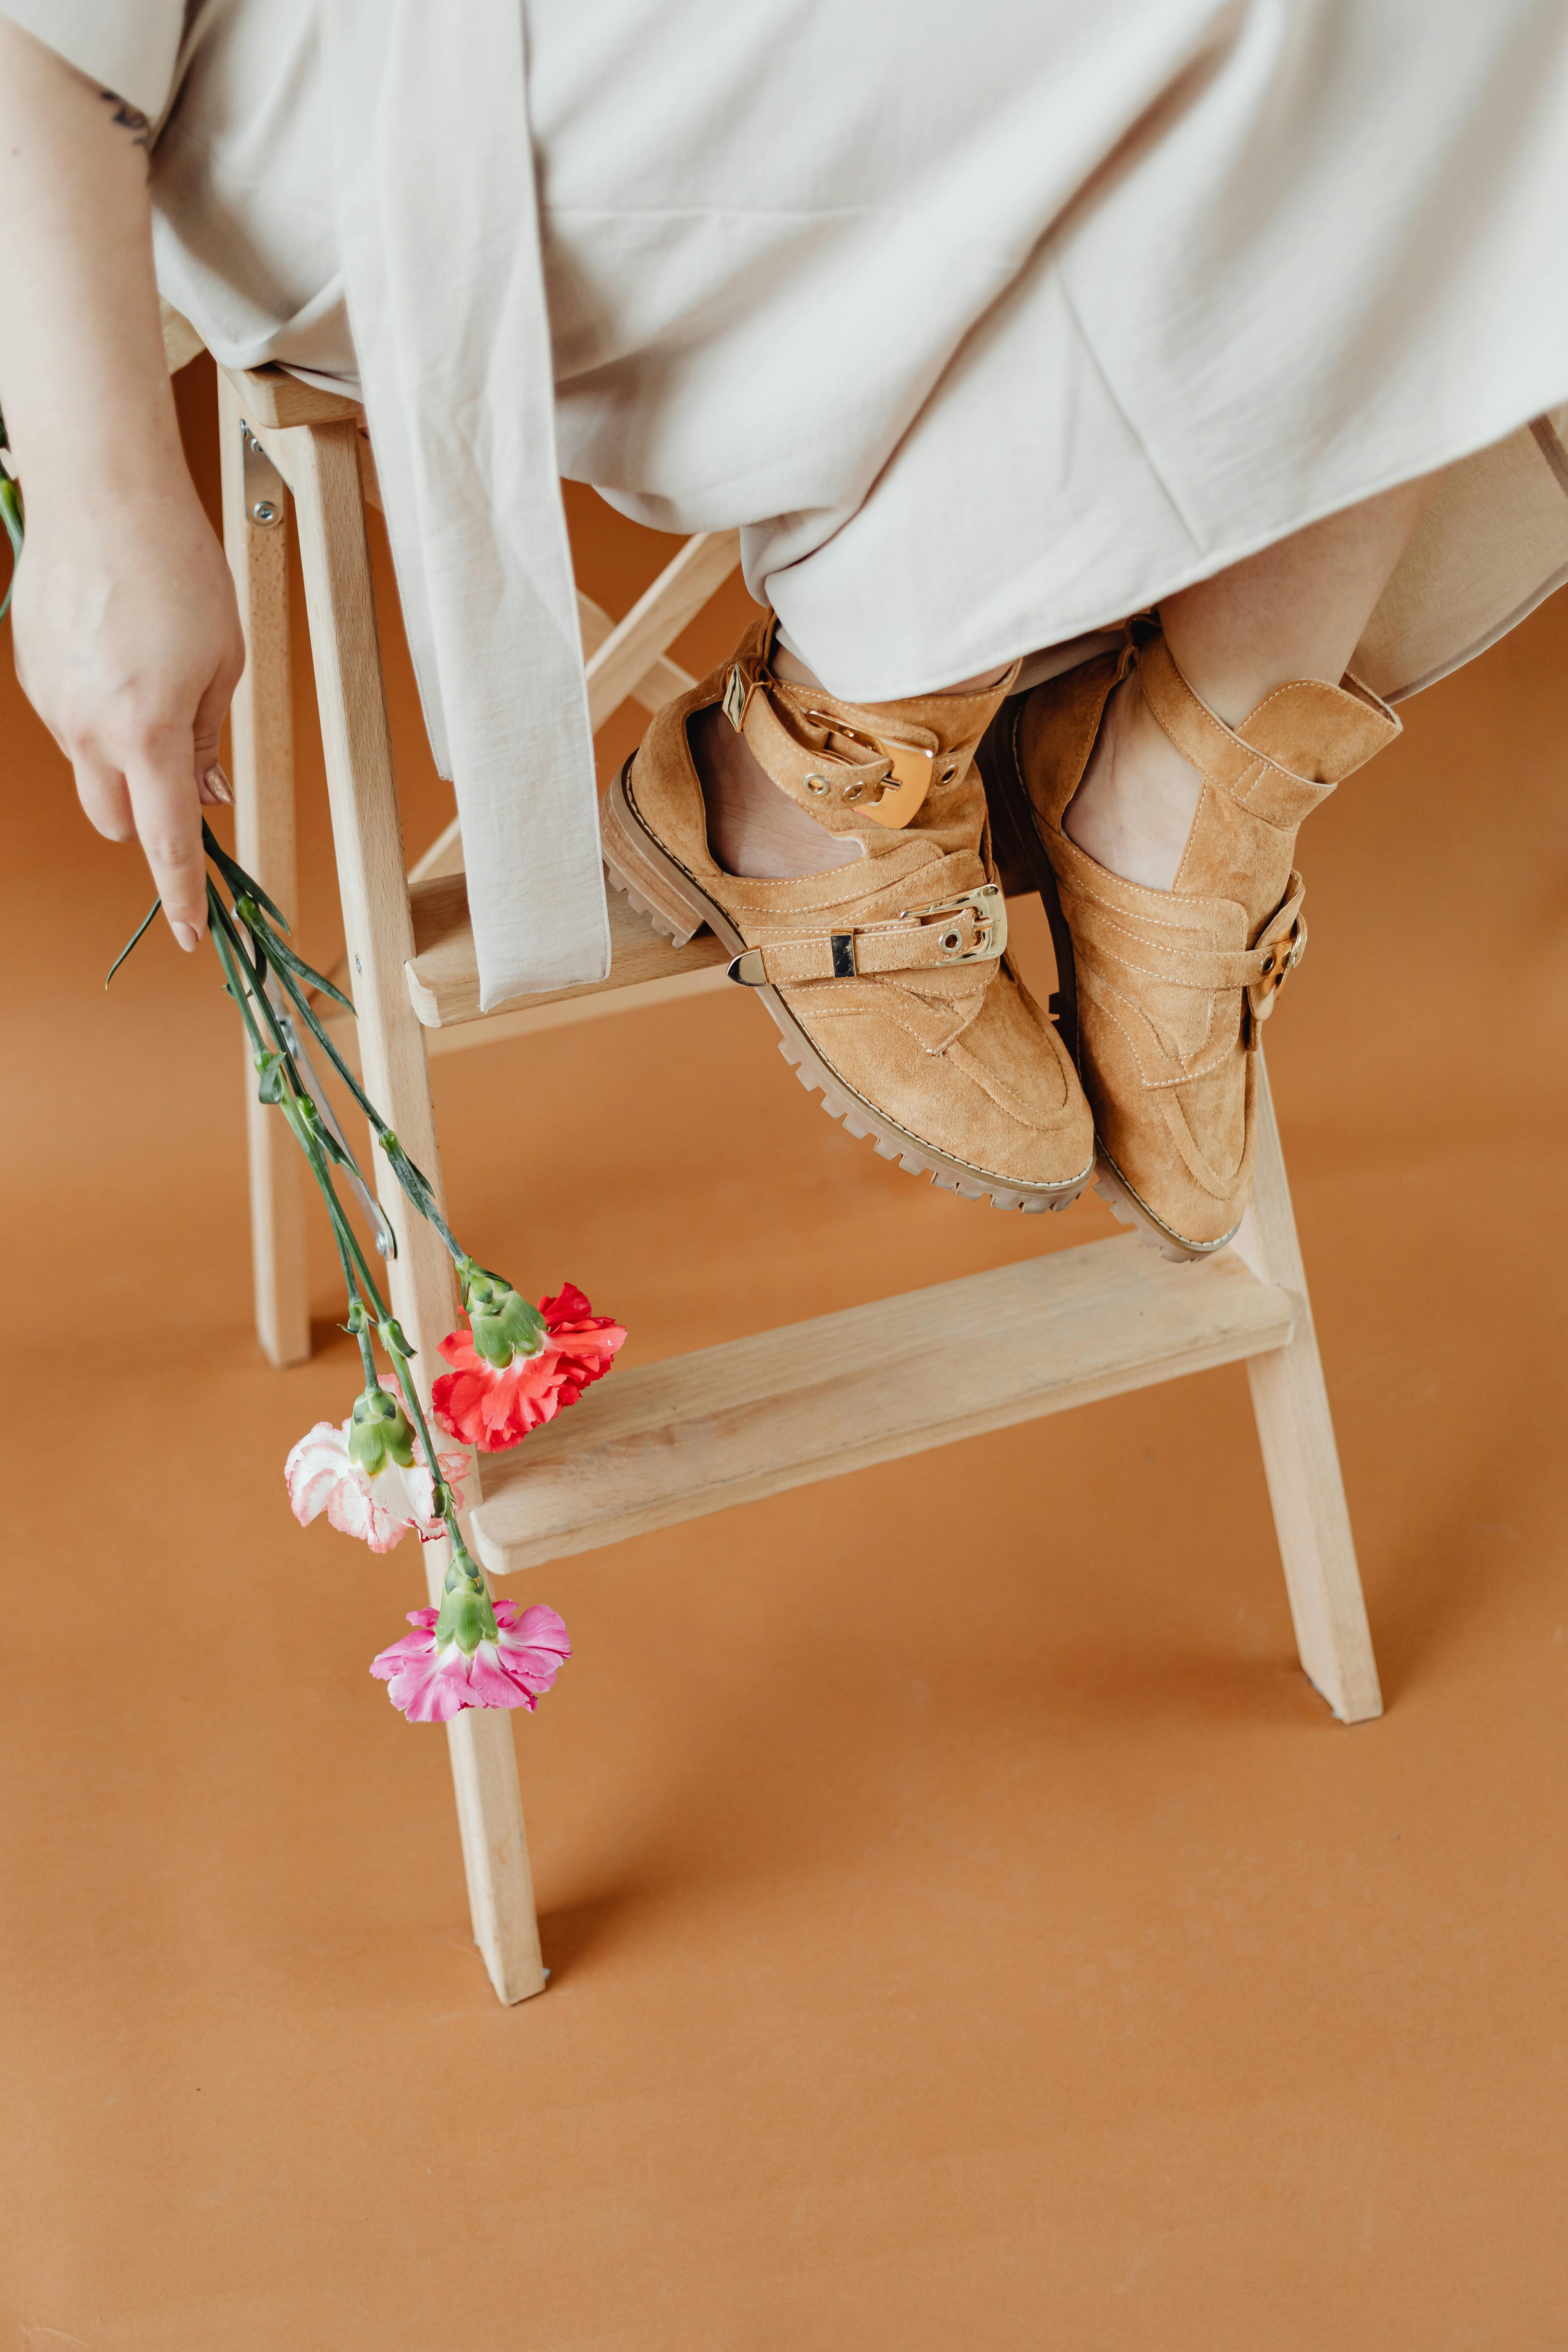 person wearing brown shoes holding flowers